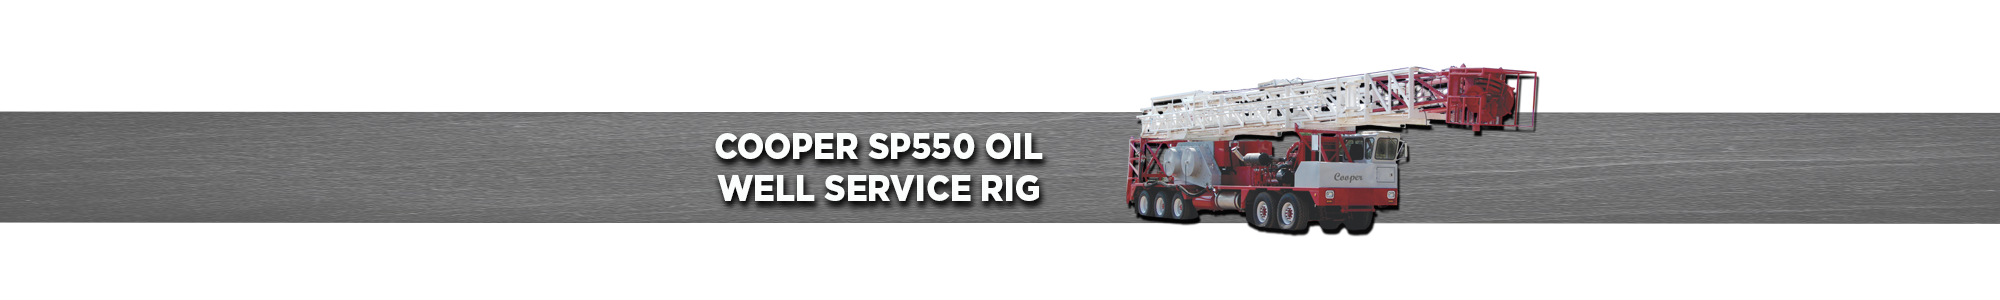 Cooper SP550 Oil Well Service Rig